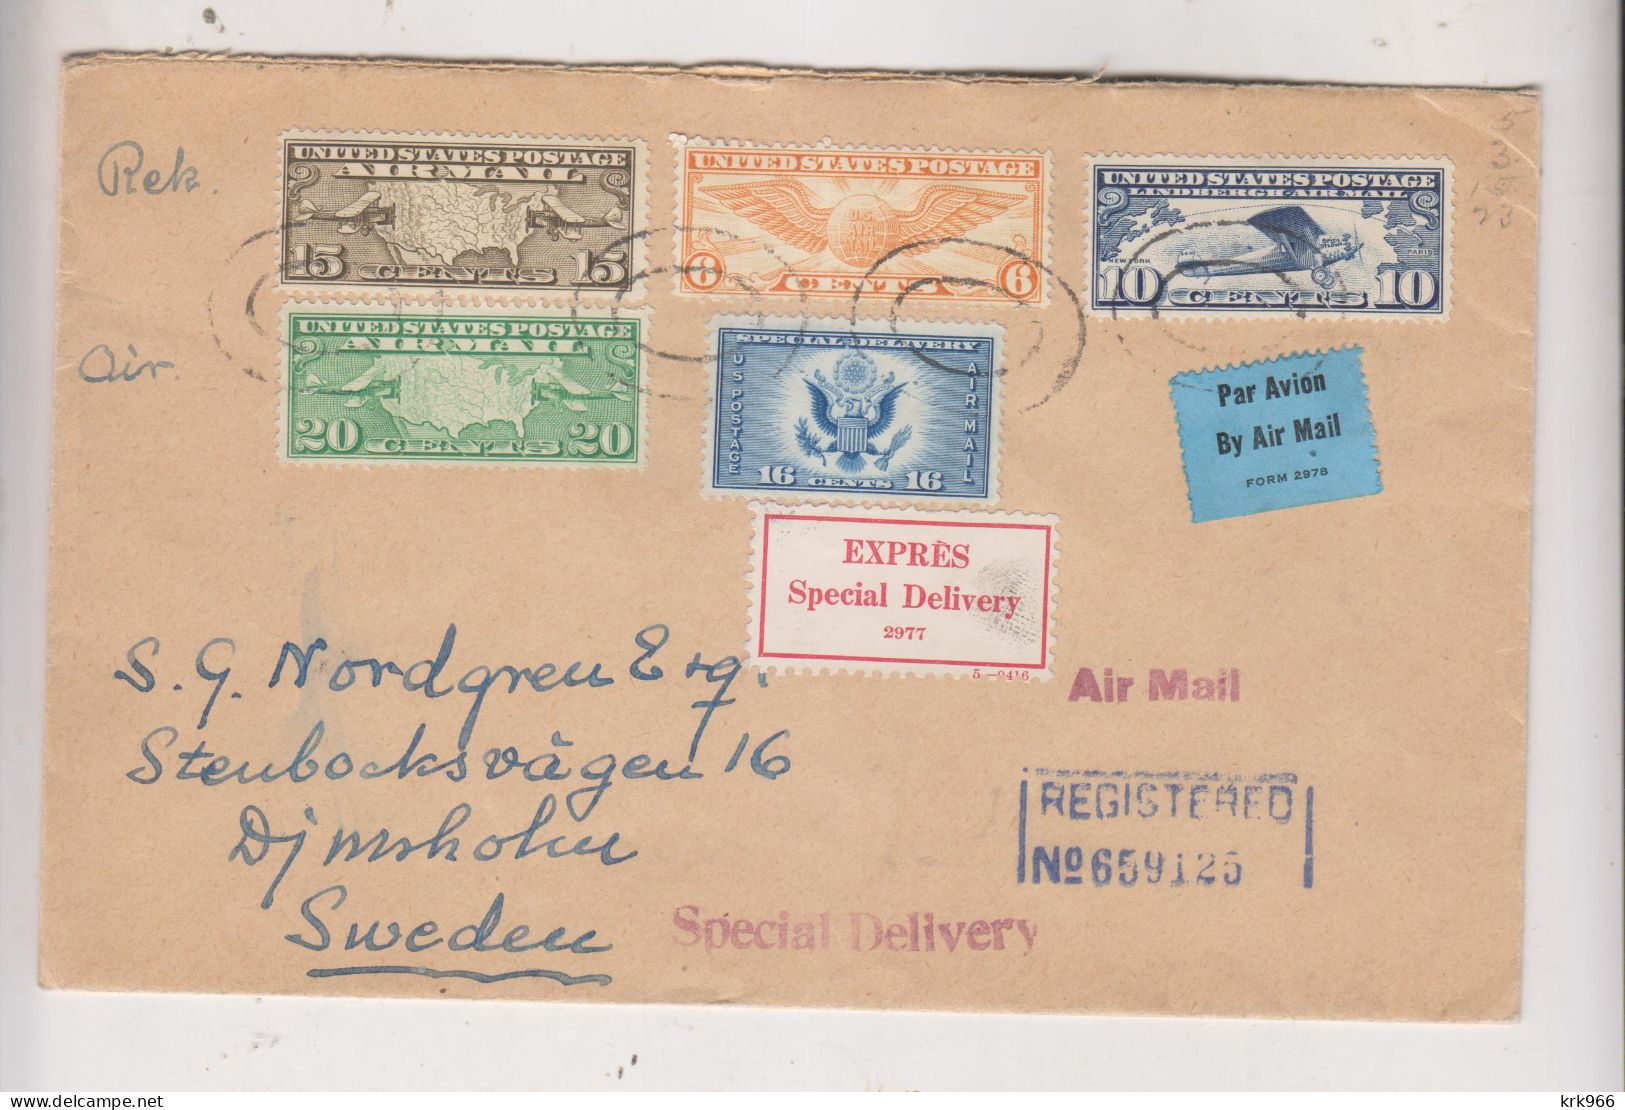 UNITED STATES 1935 NEW YORK Registered Airmail Cover To SWEDEN Special Delivery - 1c. 1918-1940 Covers